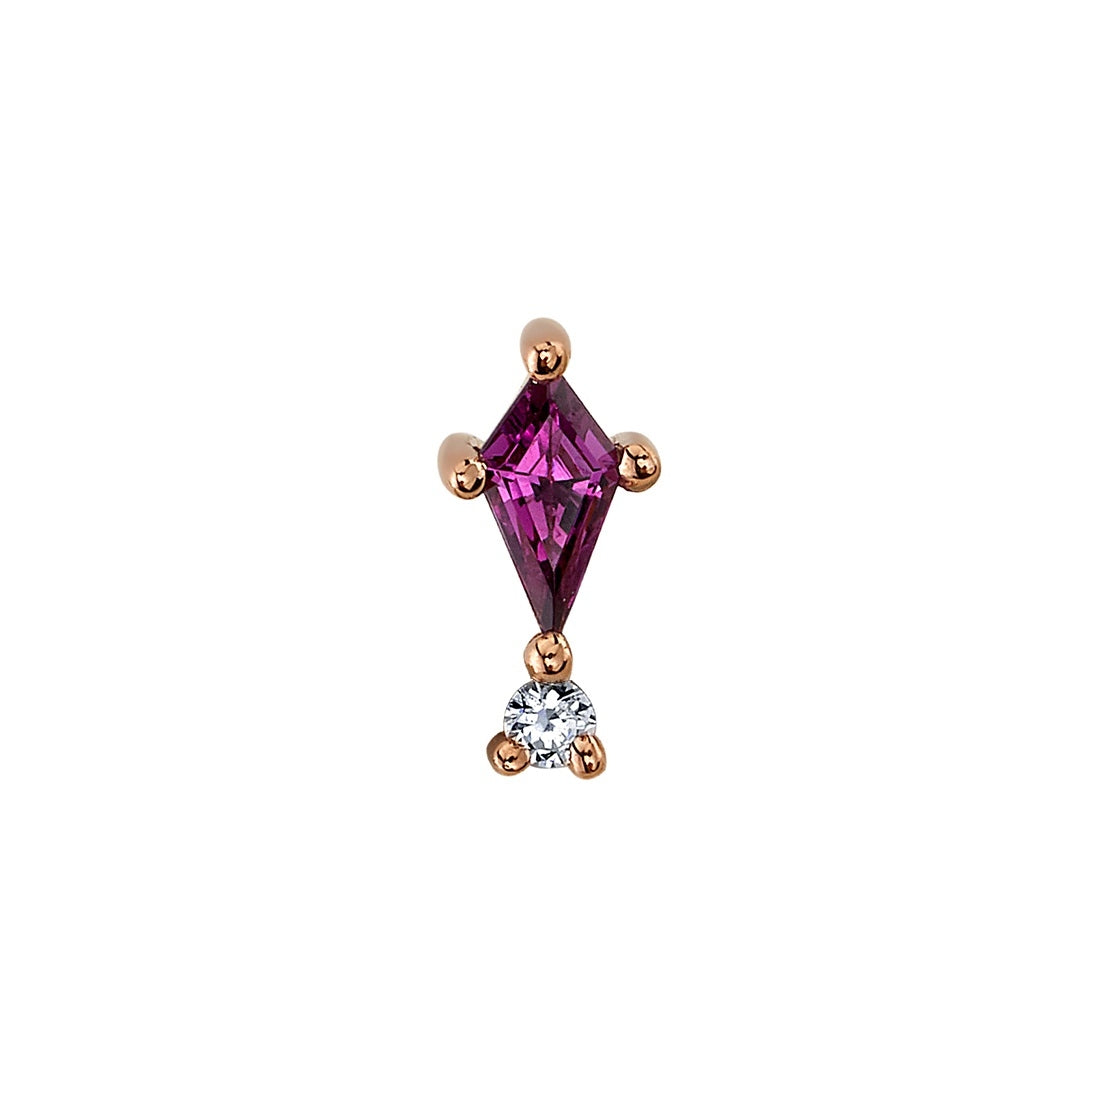 BVLA - KISS AND TELL - 14KT SOLID GOLD - THREADED END